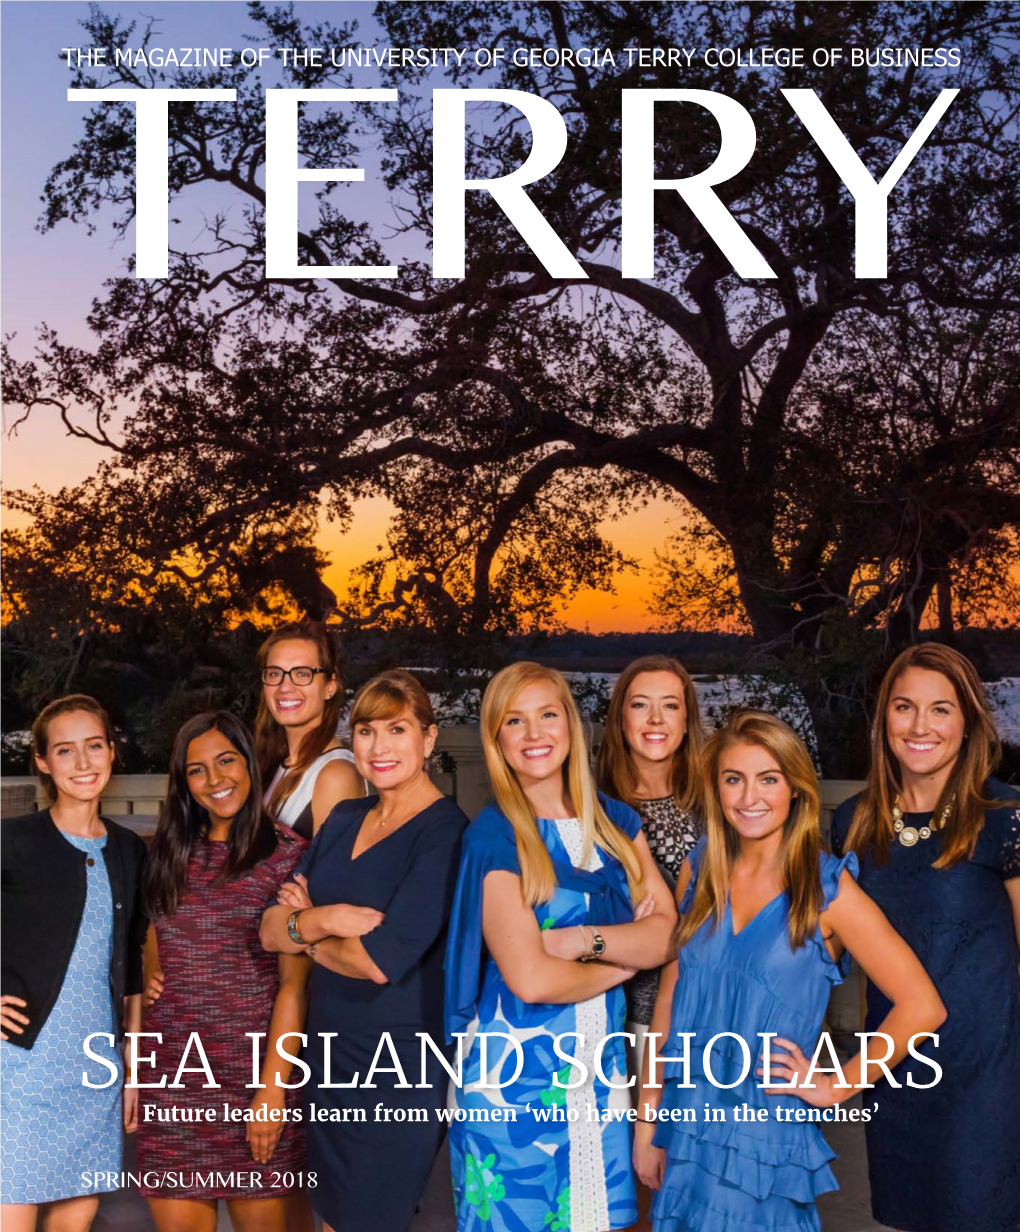 SEA ISLAND SCHOLARS Future Leaders Learn from Women ‘Who Have Been in the Trenches’